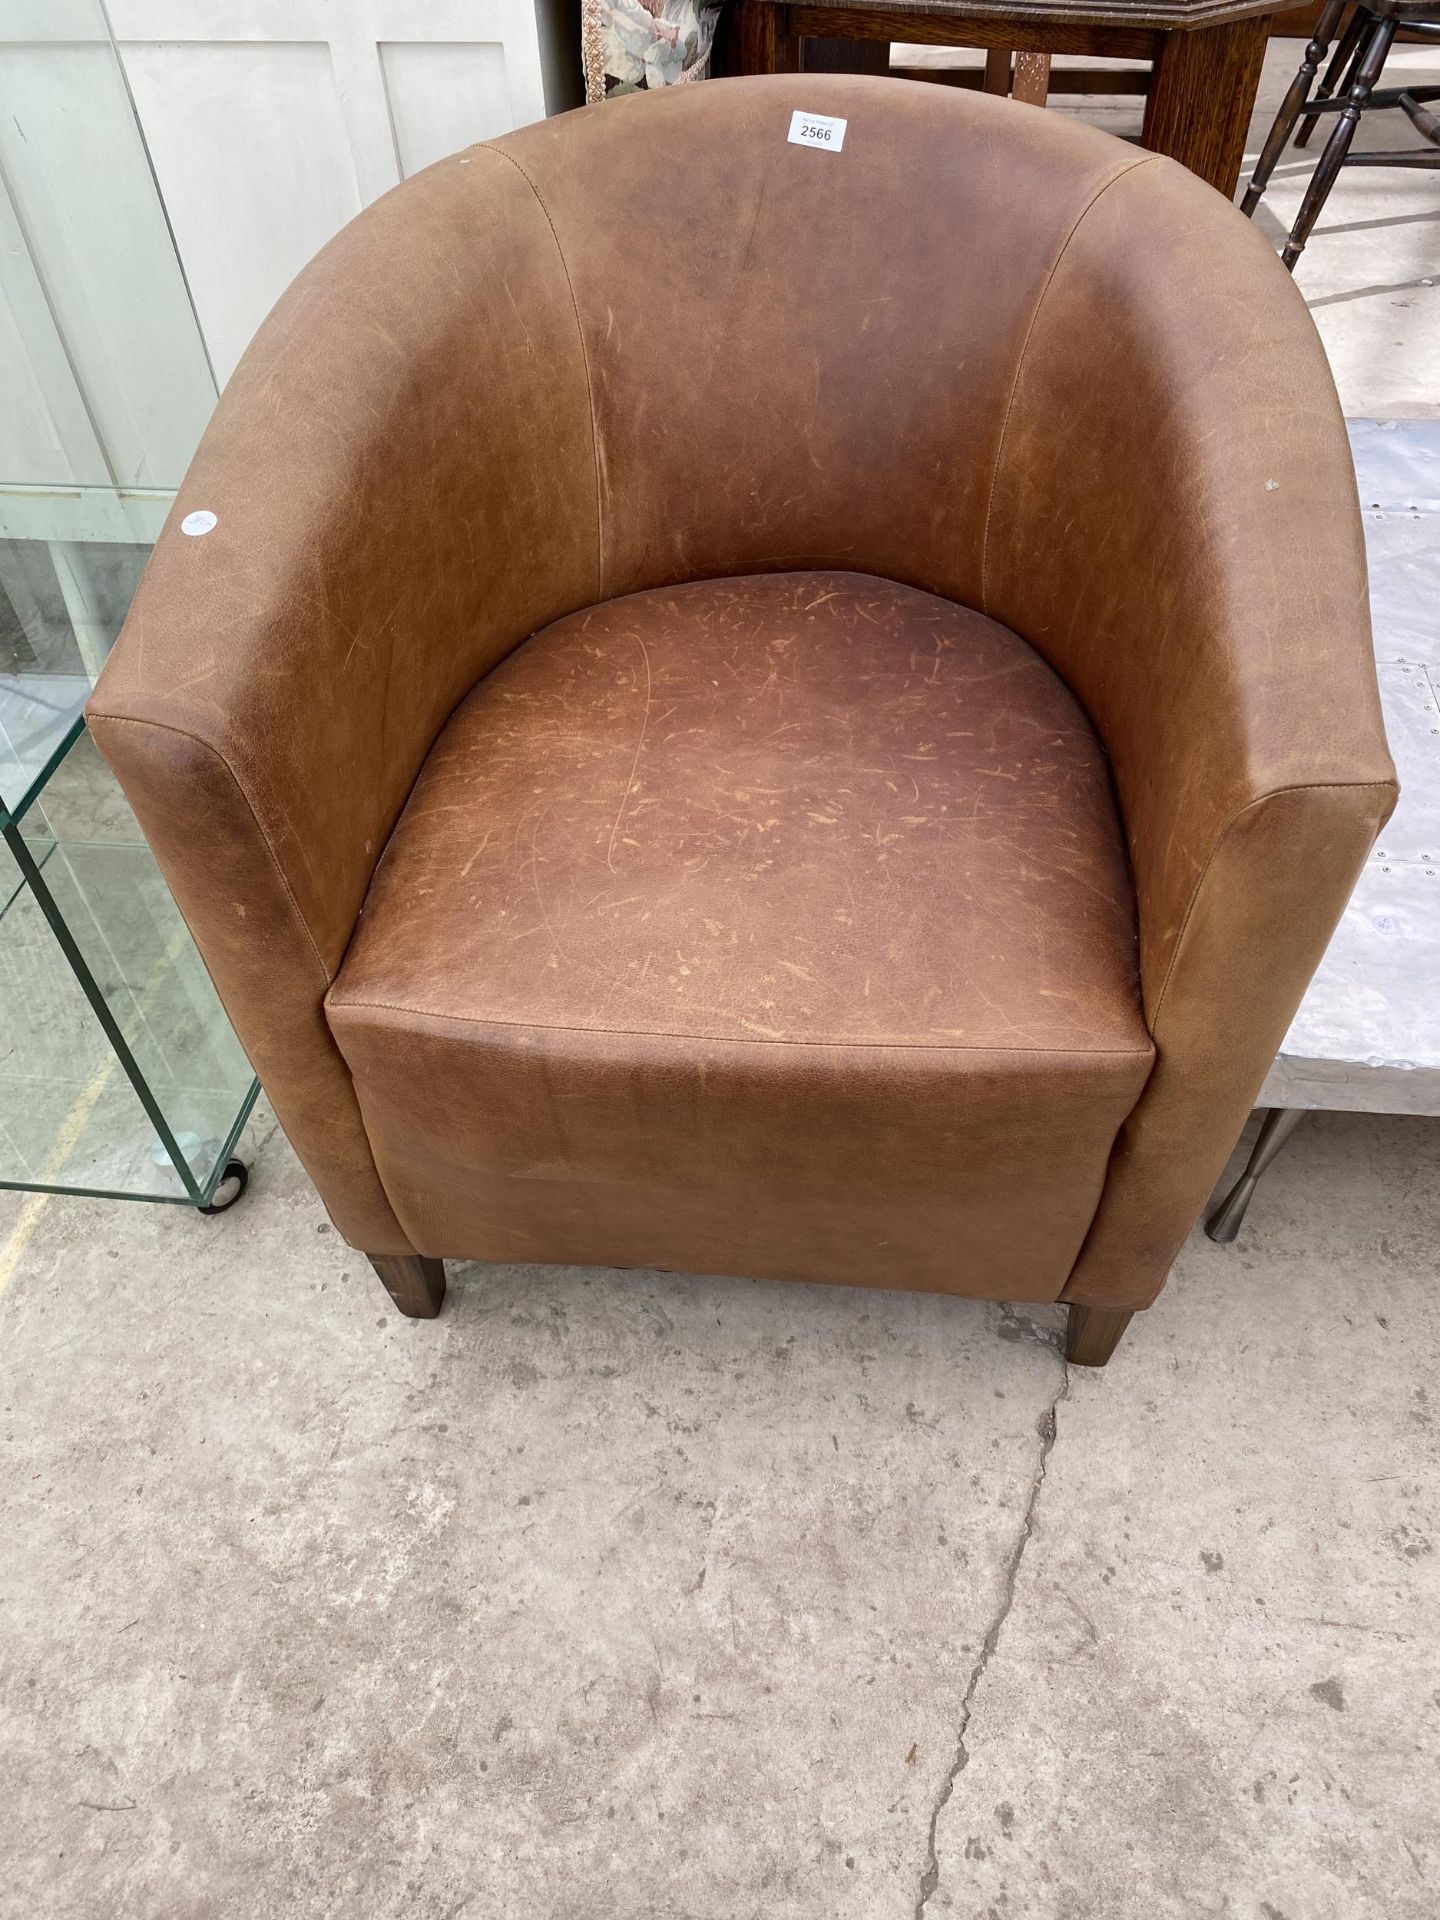 A VINTAGE CONTRACTS LEATHER TUB CHAIR